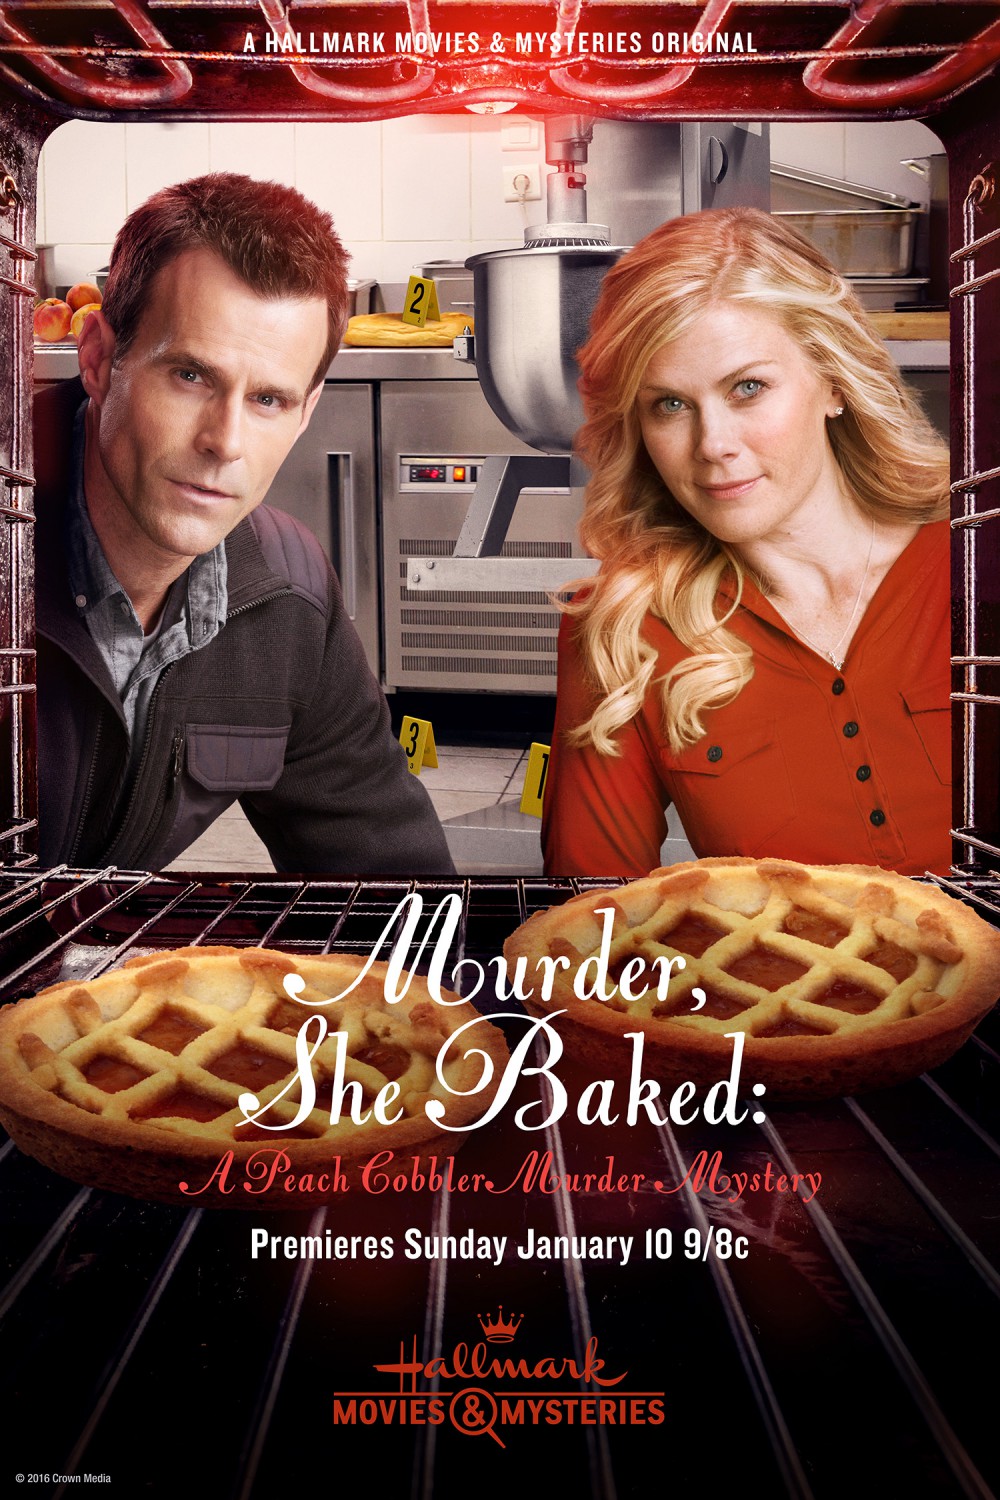 Extra Large TV Poster Image for Murder She Baked: A Peach Cobbler Murder Mystery 